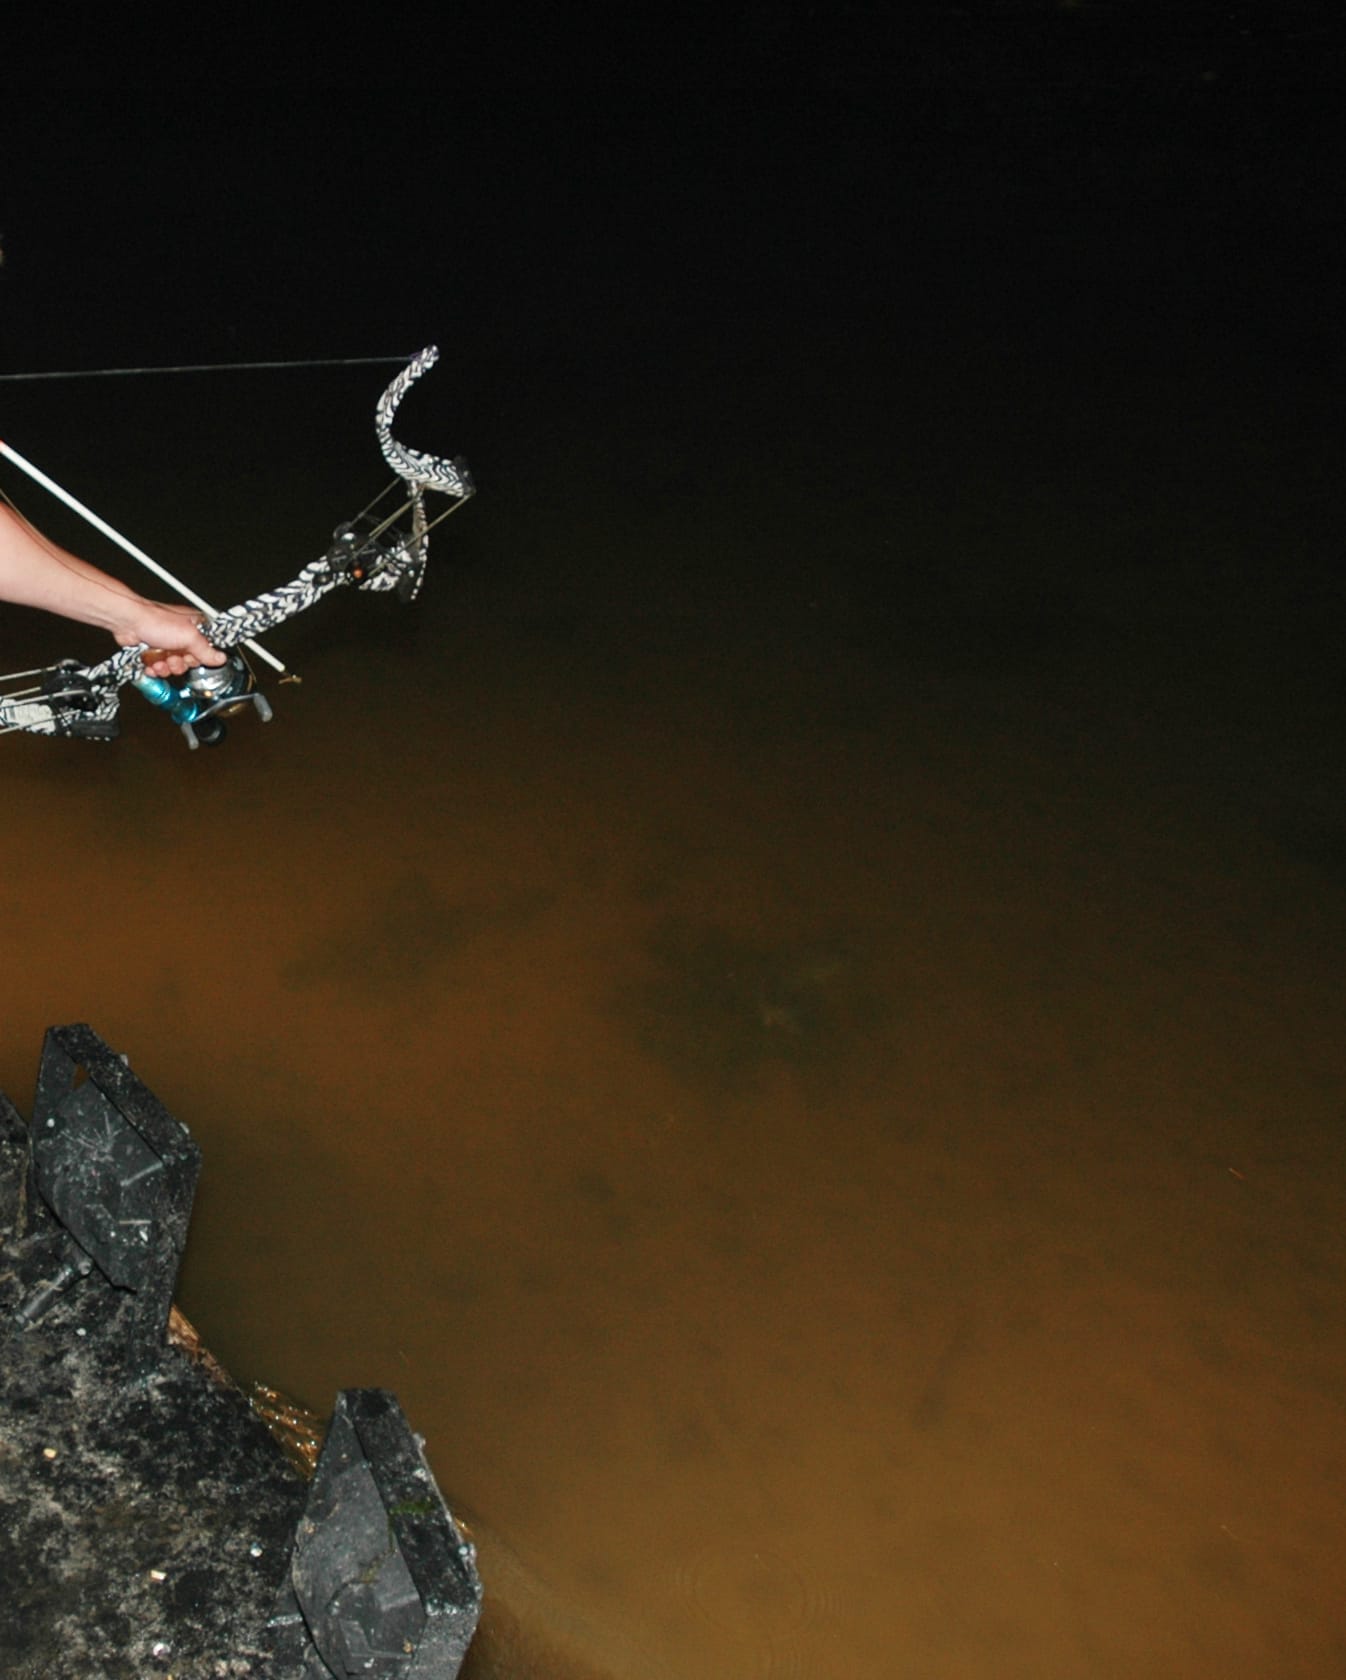 Aiming lower than a fish appears is necessary when bowfishing.